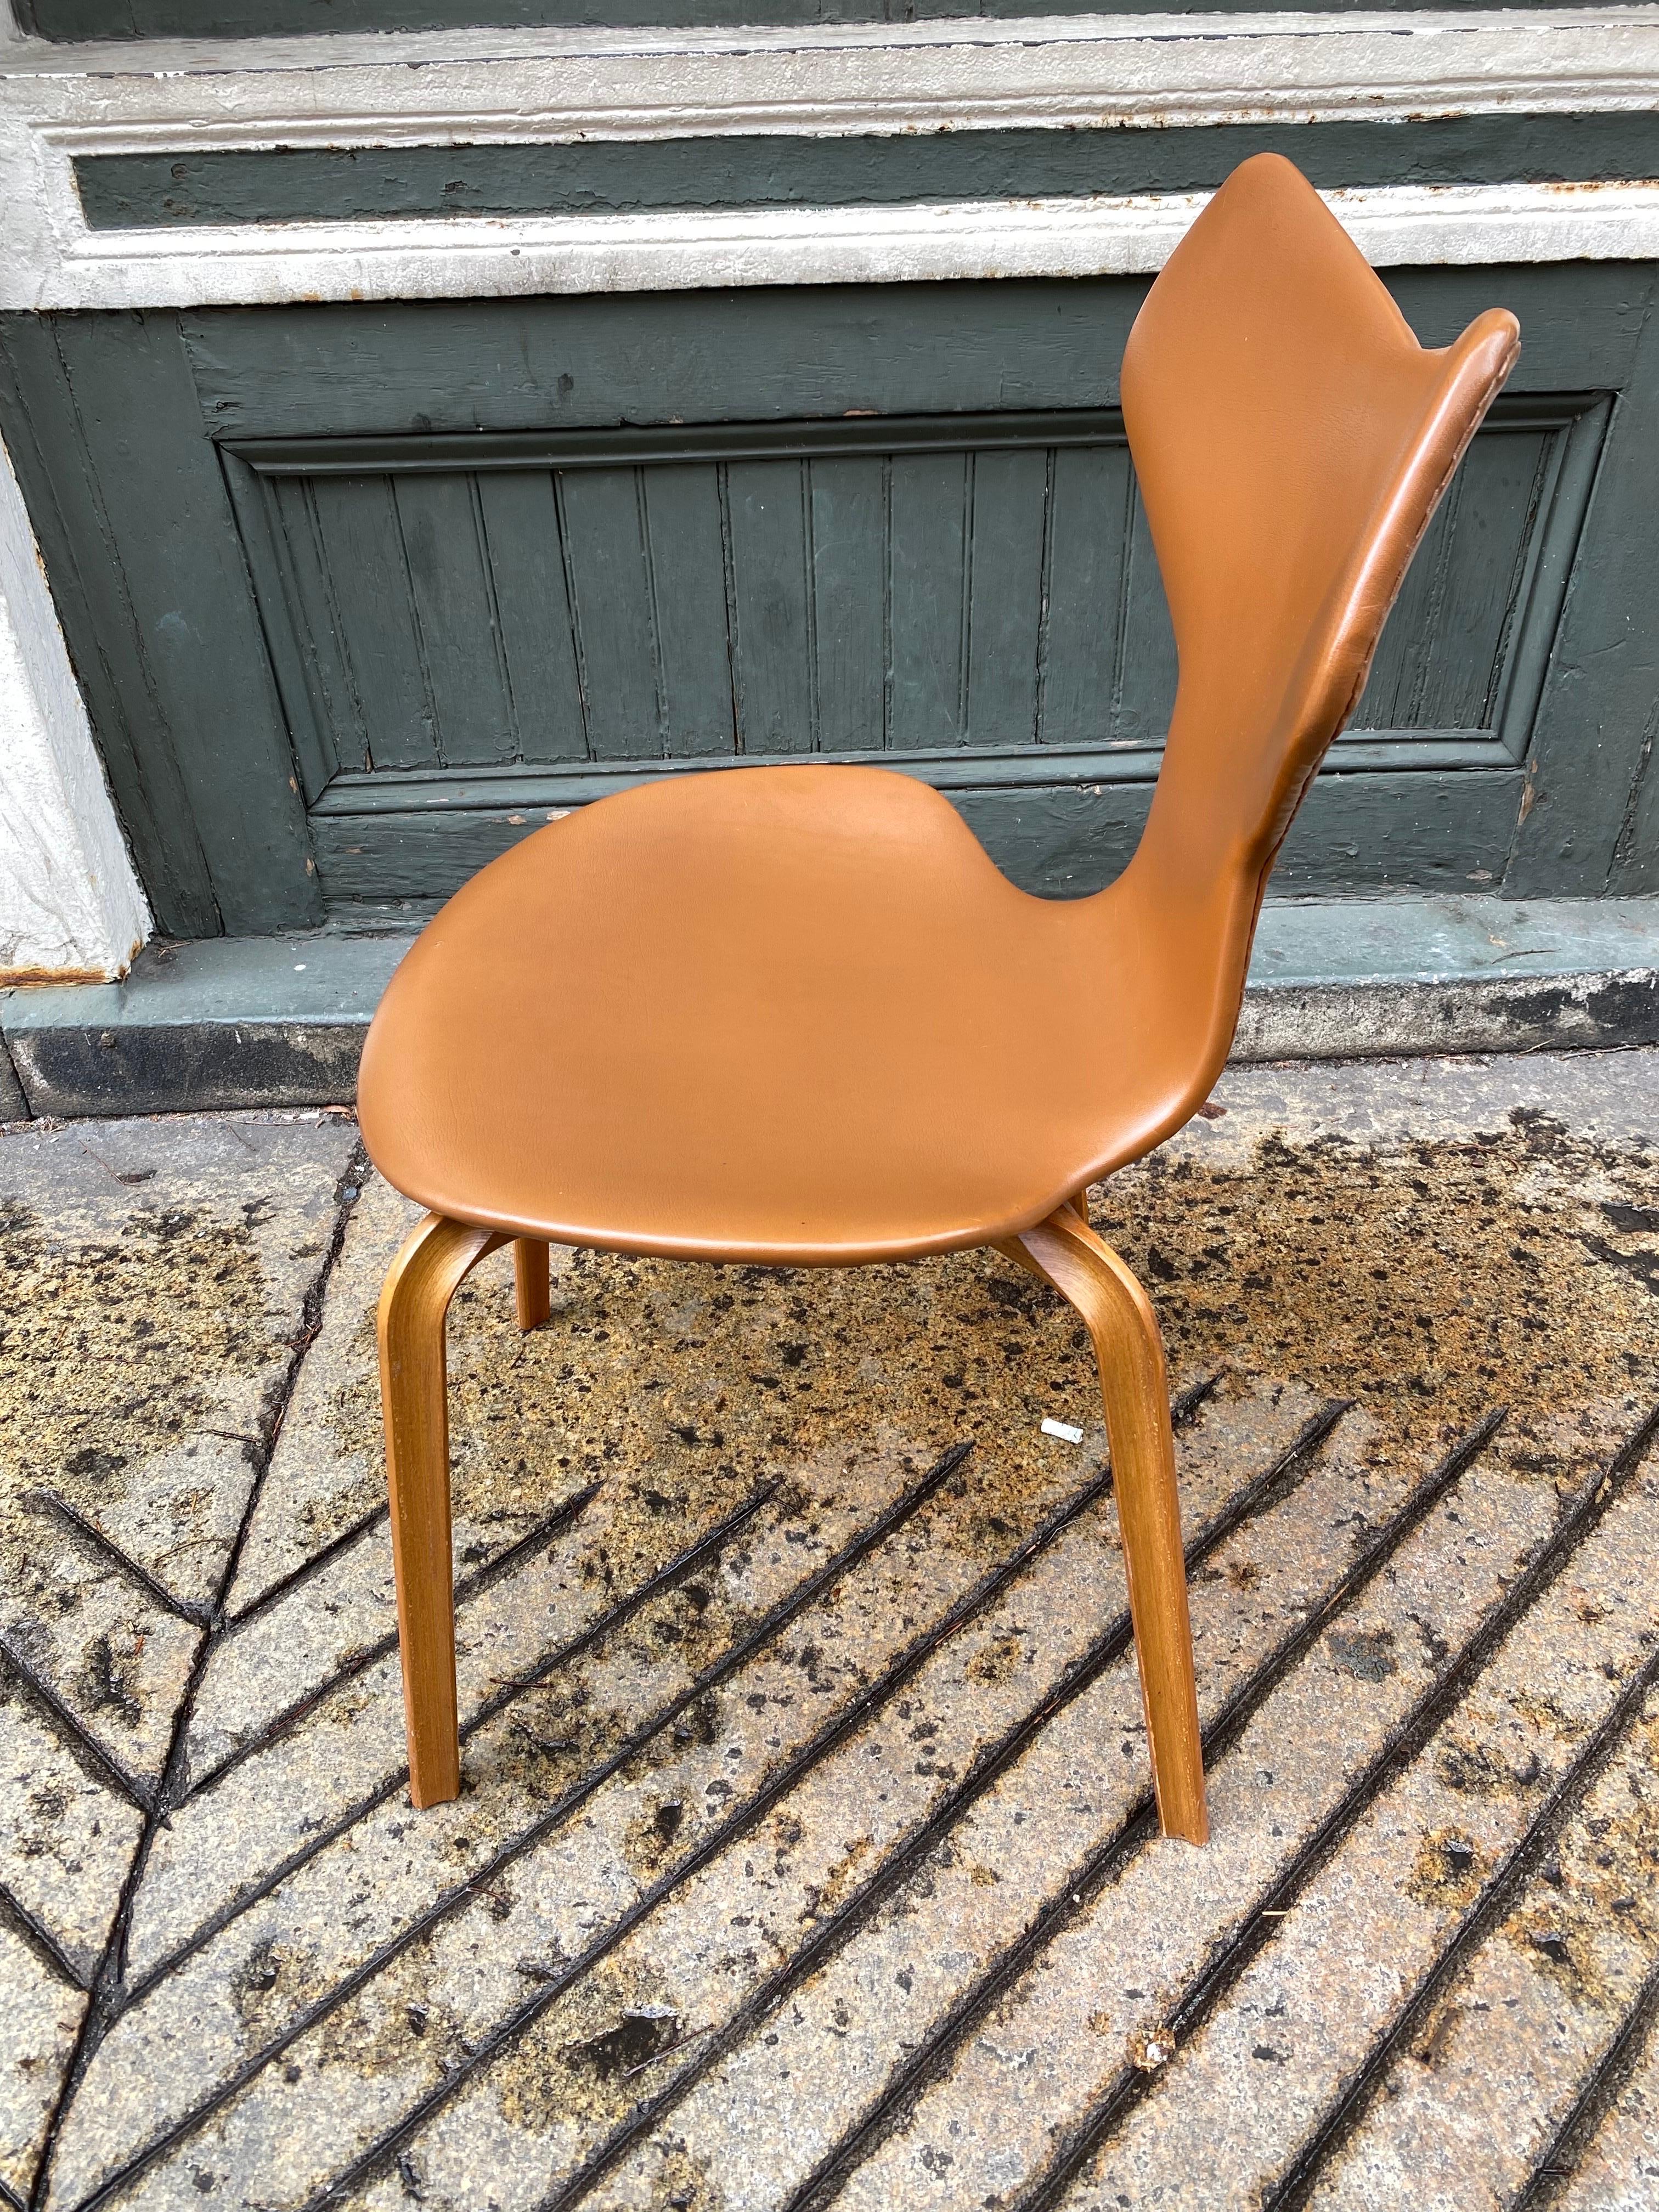 Mid-20th Century Arne Jacobsen Grand Prix Chair 4130 For Sale